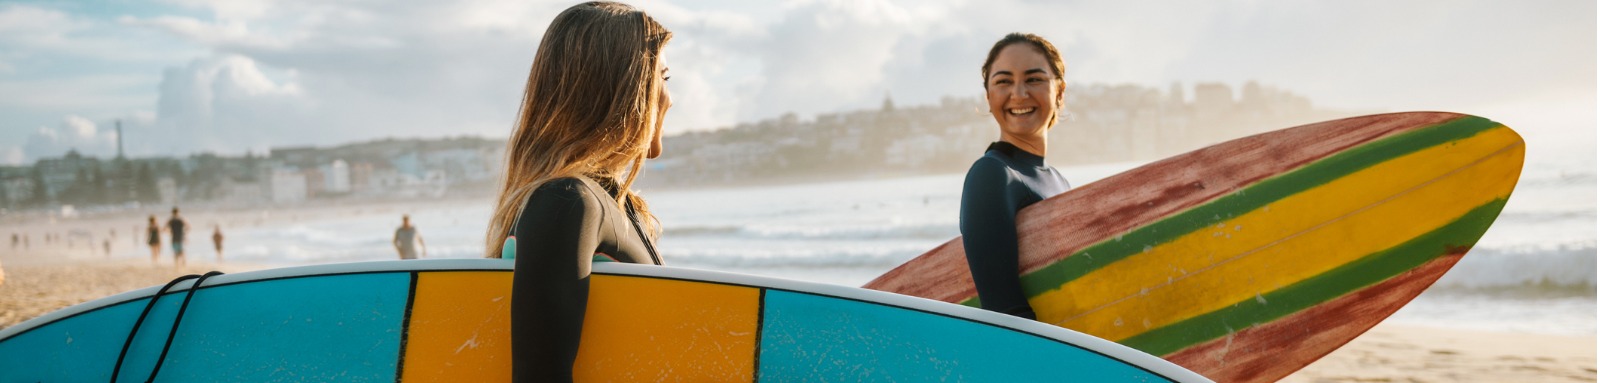 Two smiling women holding surfboards on the beach